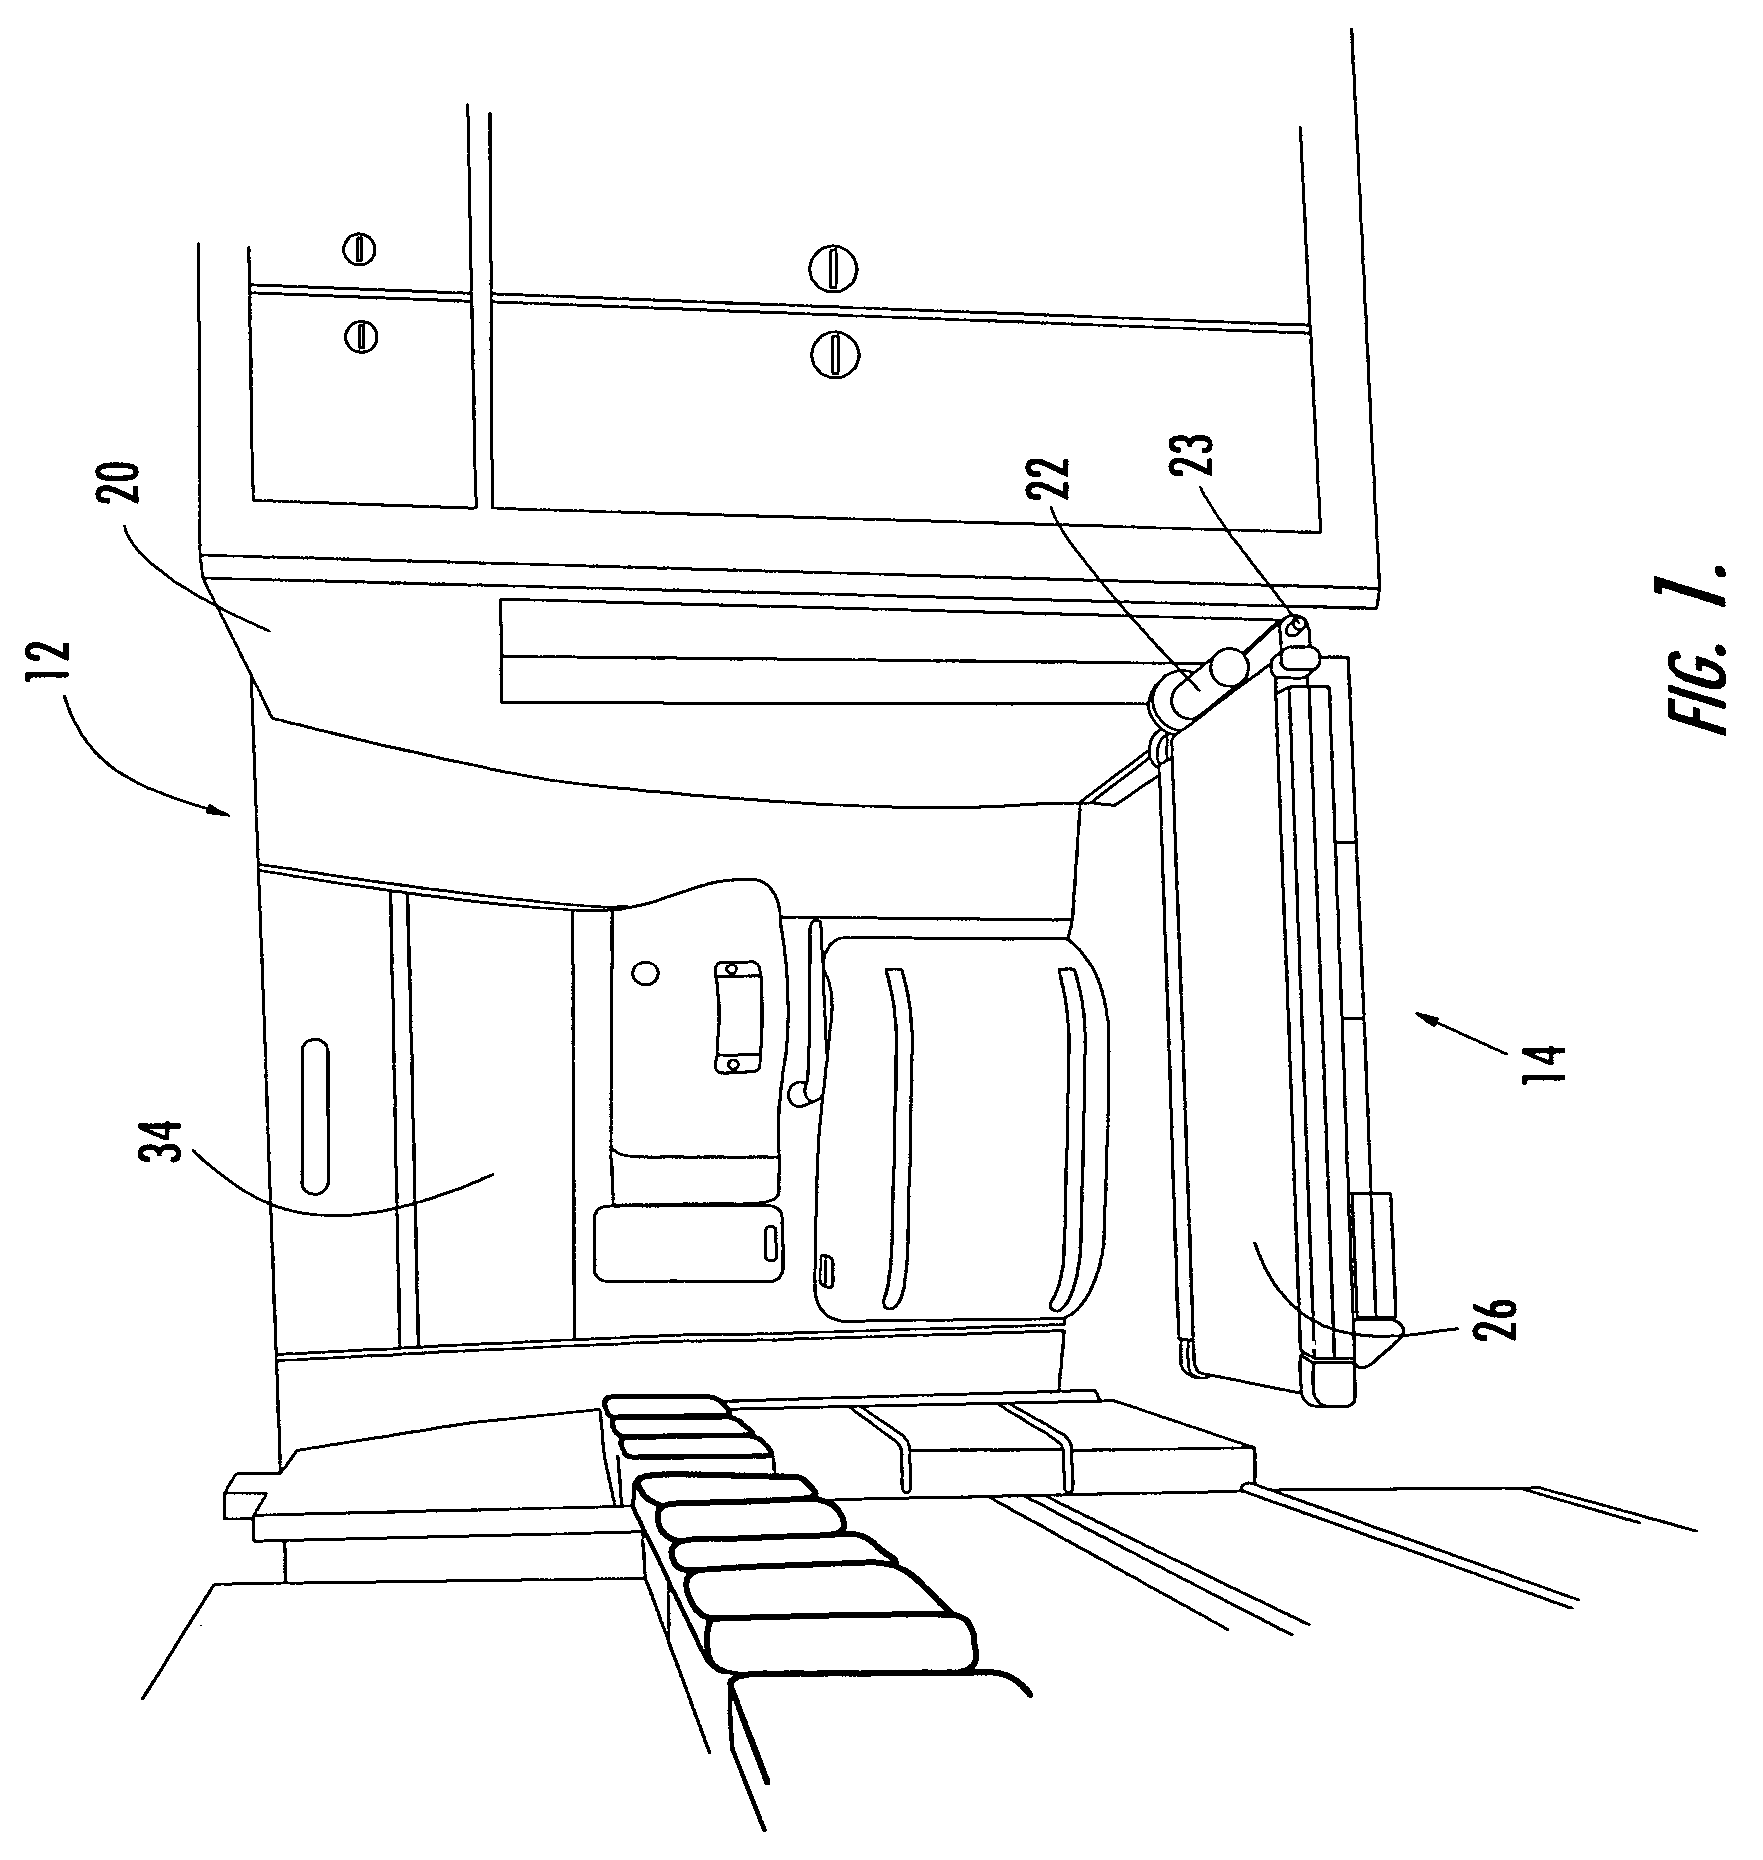 Seating and treadmill exercise device